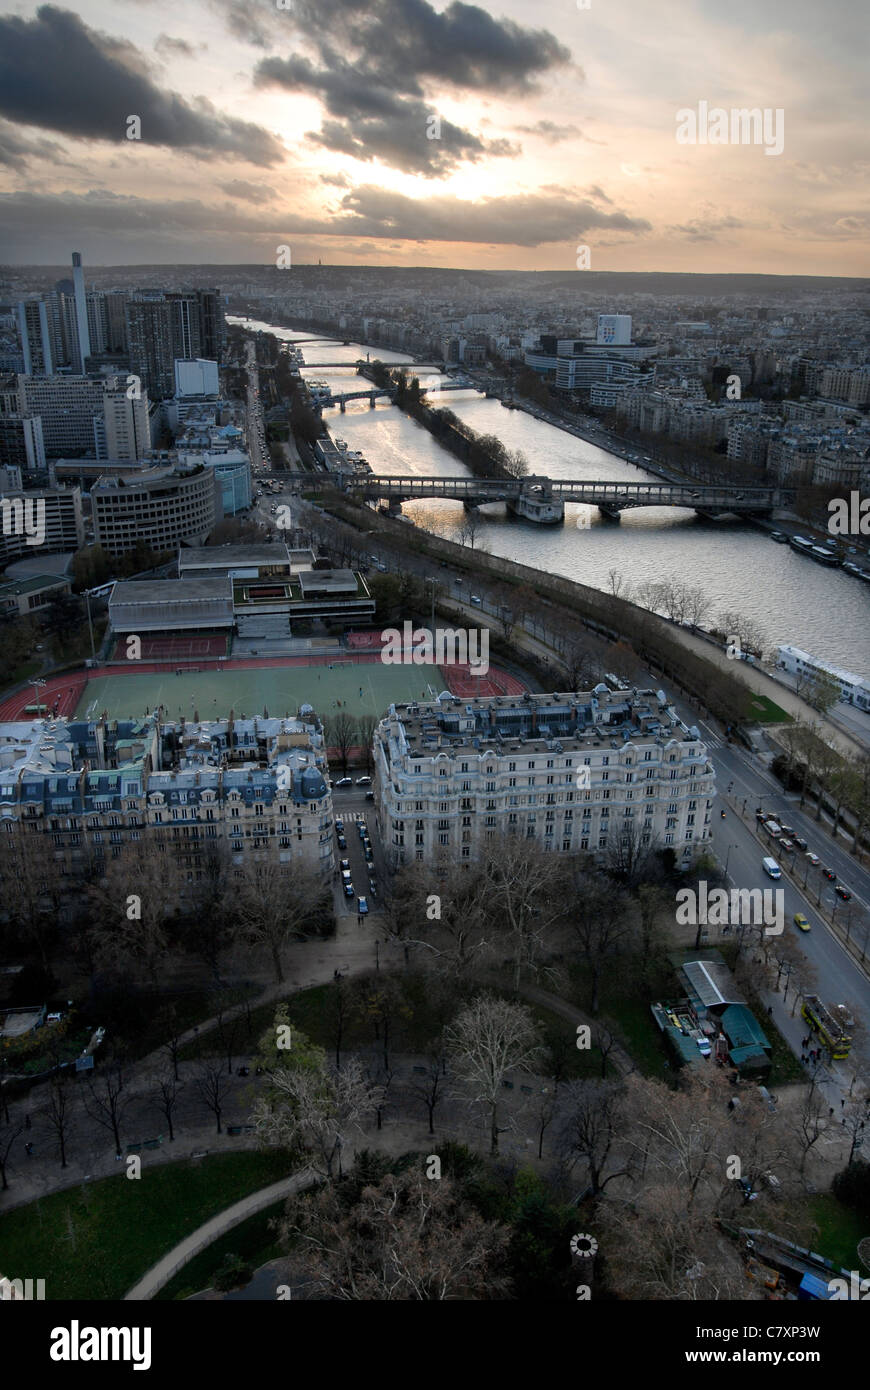 The River Seine from the Eiffel Tower, Paris. Stock Photo